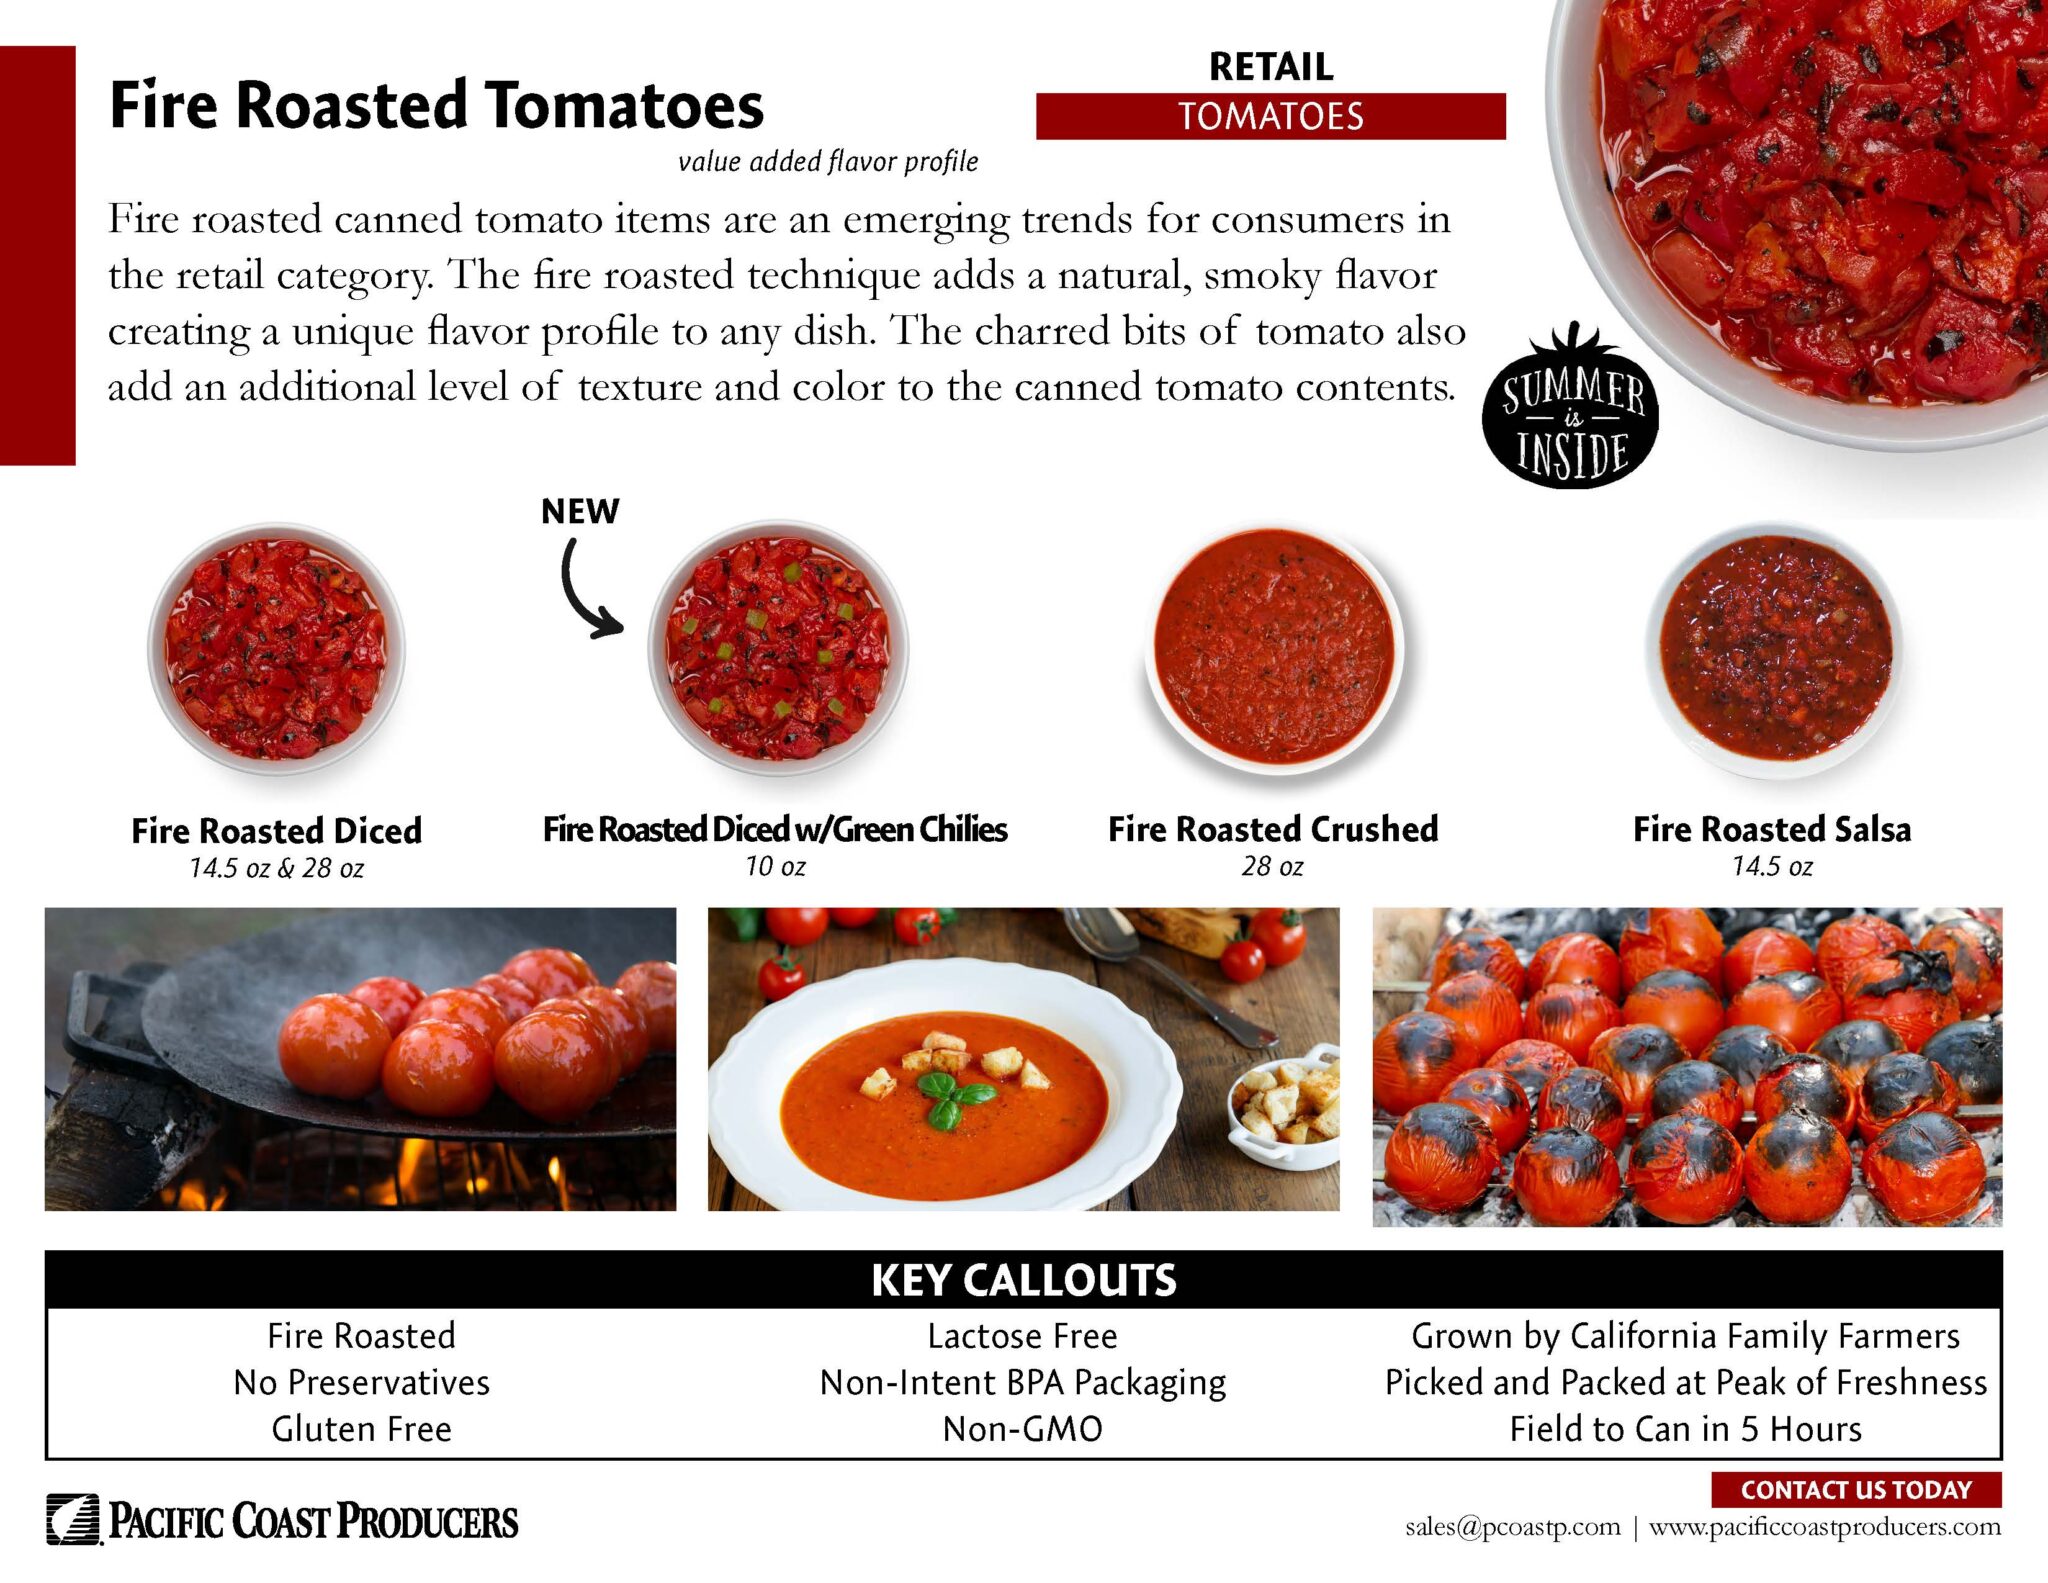 Fire Roasted Tomatoes retail infographic.